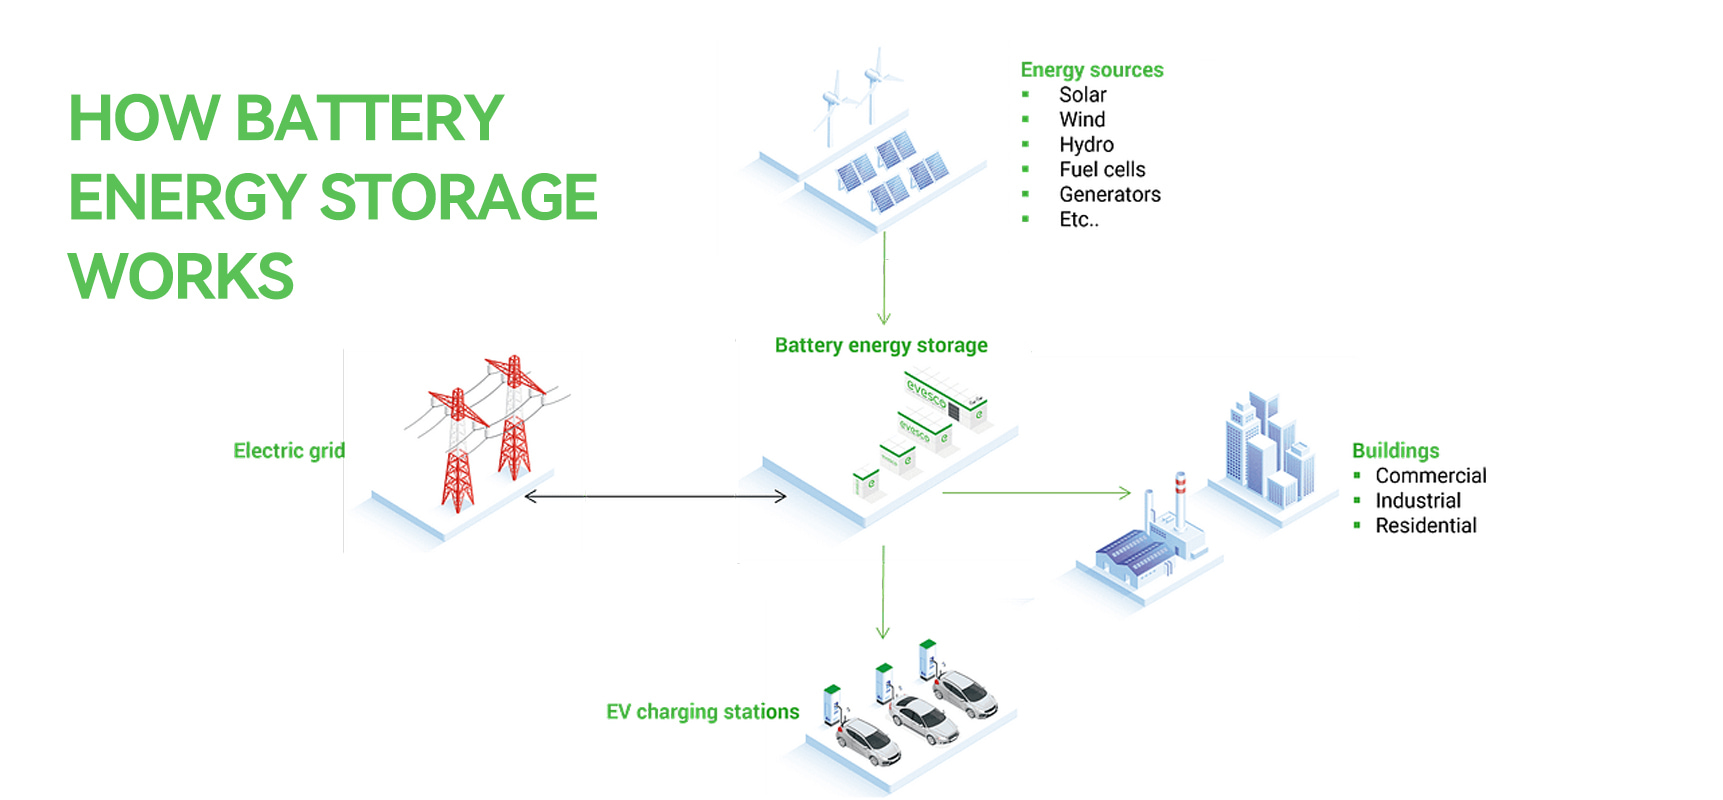 BATTERY ENERGY STORAGE: HOW IT WORKS, AND WHY IT'S IMPORTANT